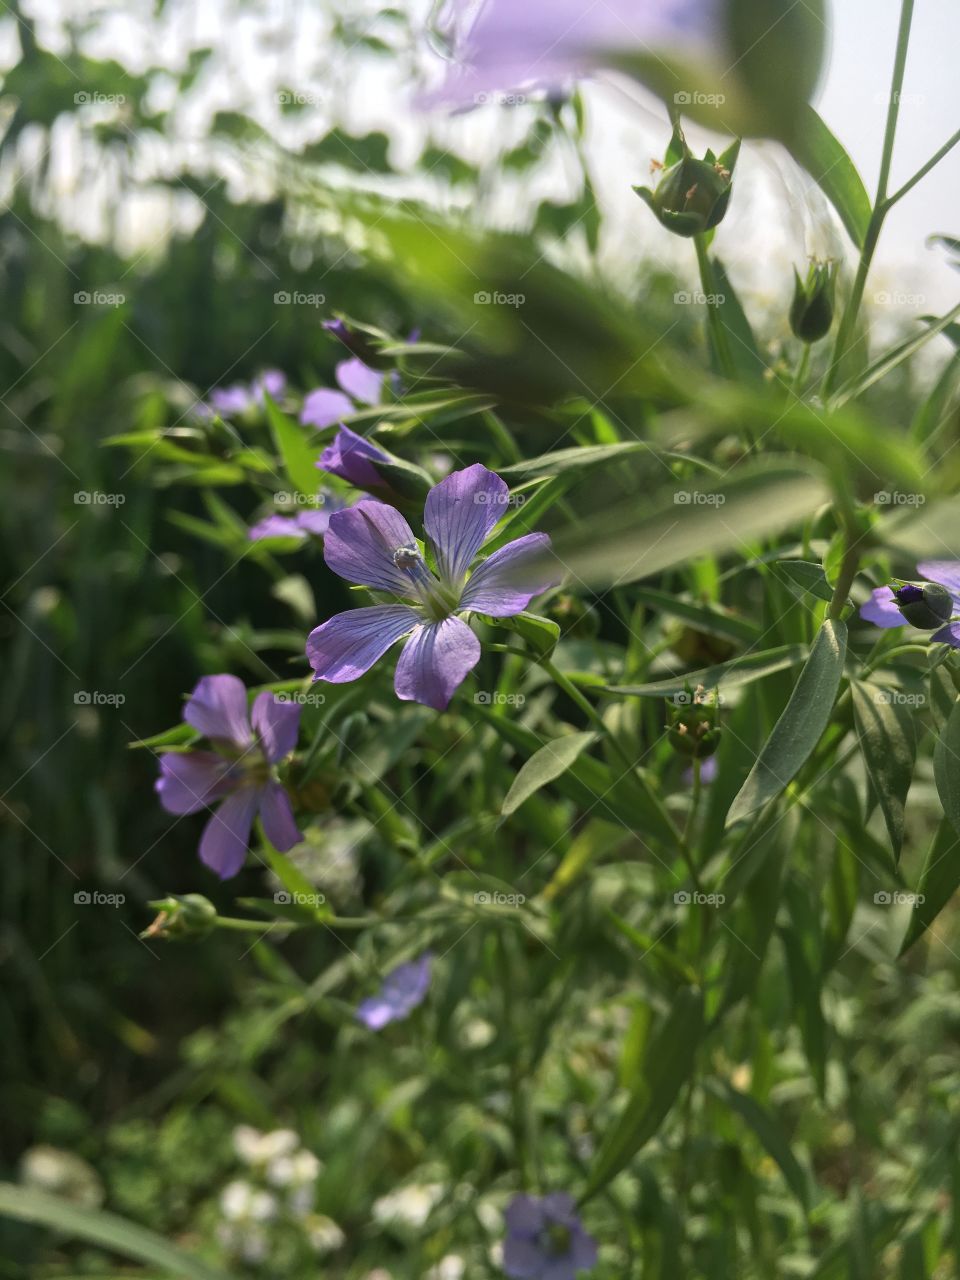 This is a flower of linseed and beautiful also.